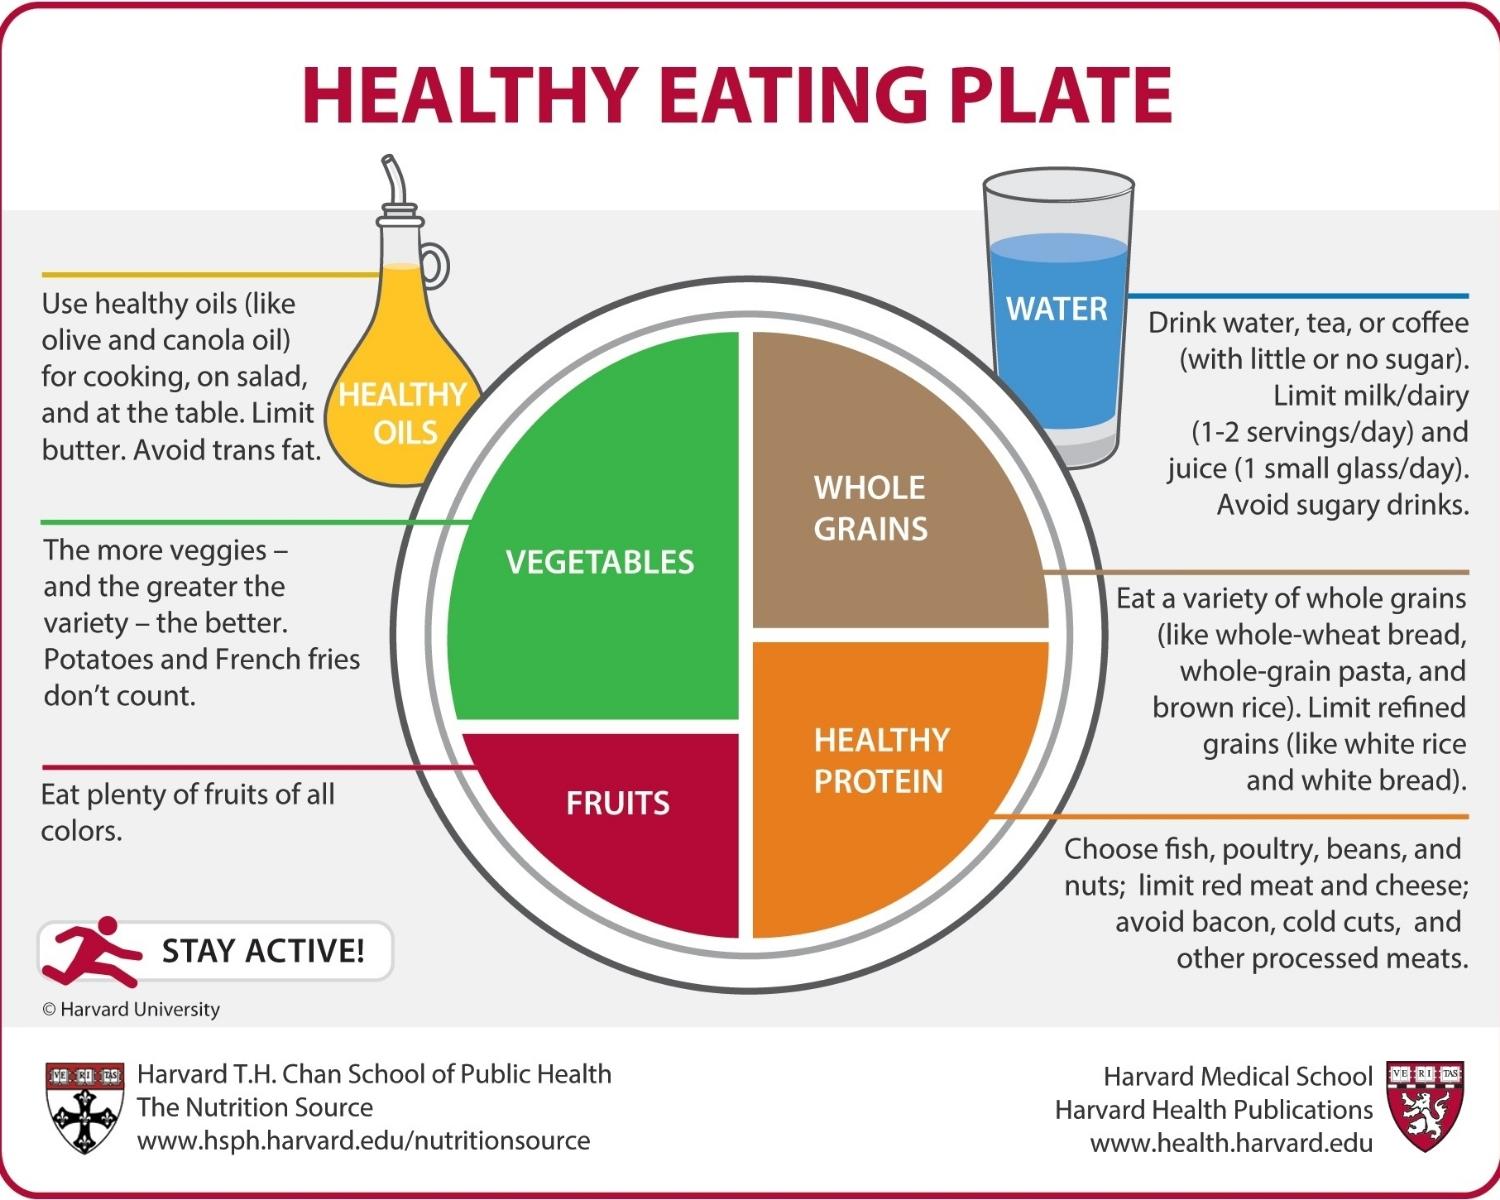 1.Build your plate around healthy choices